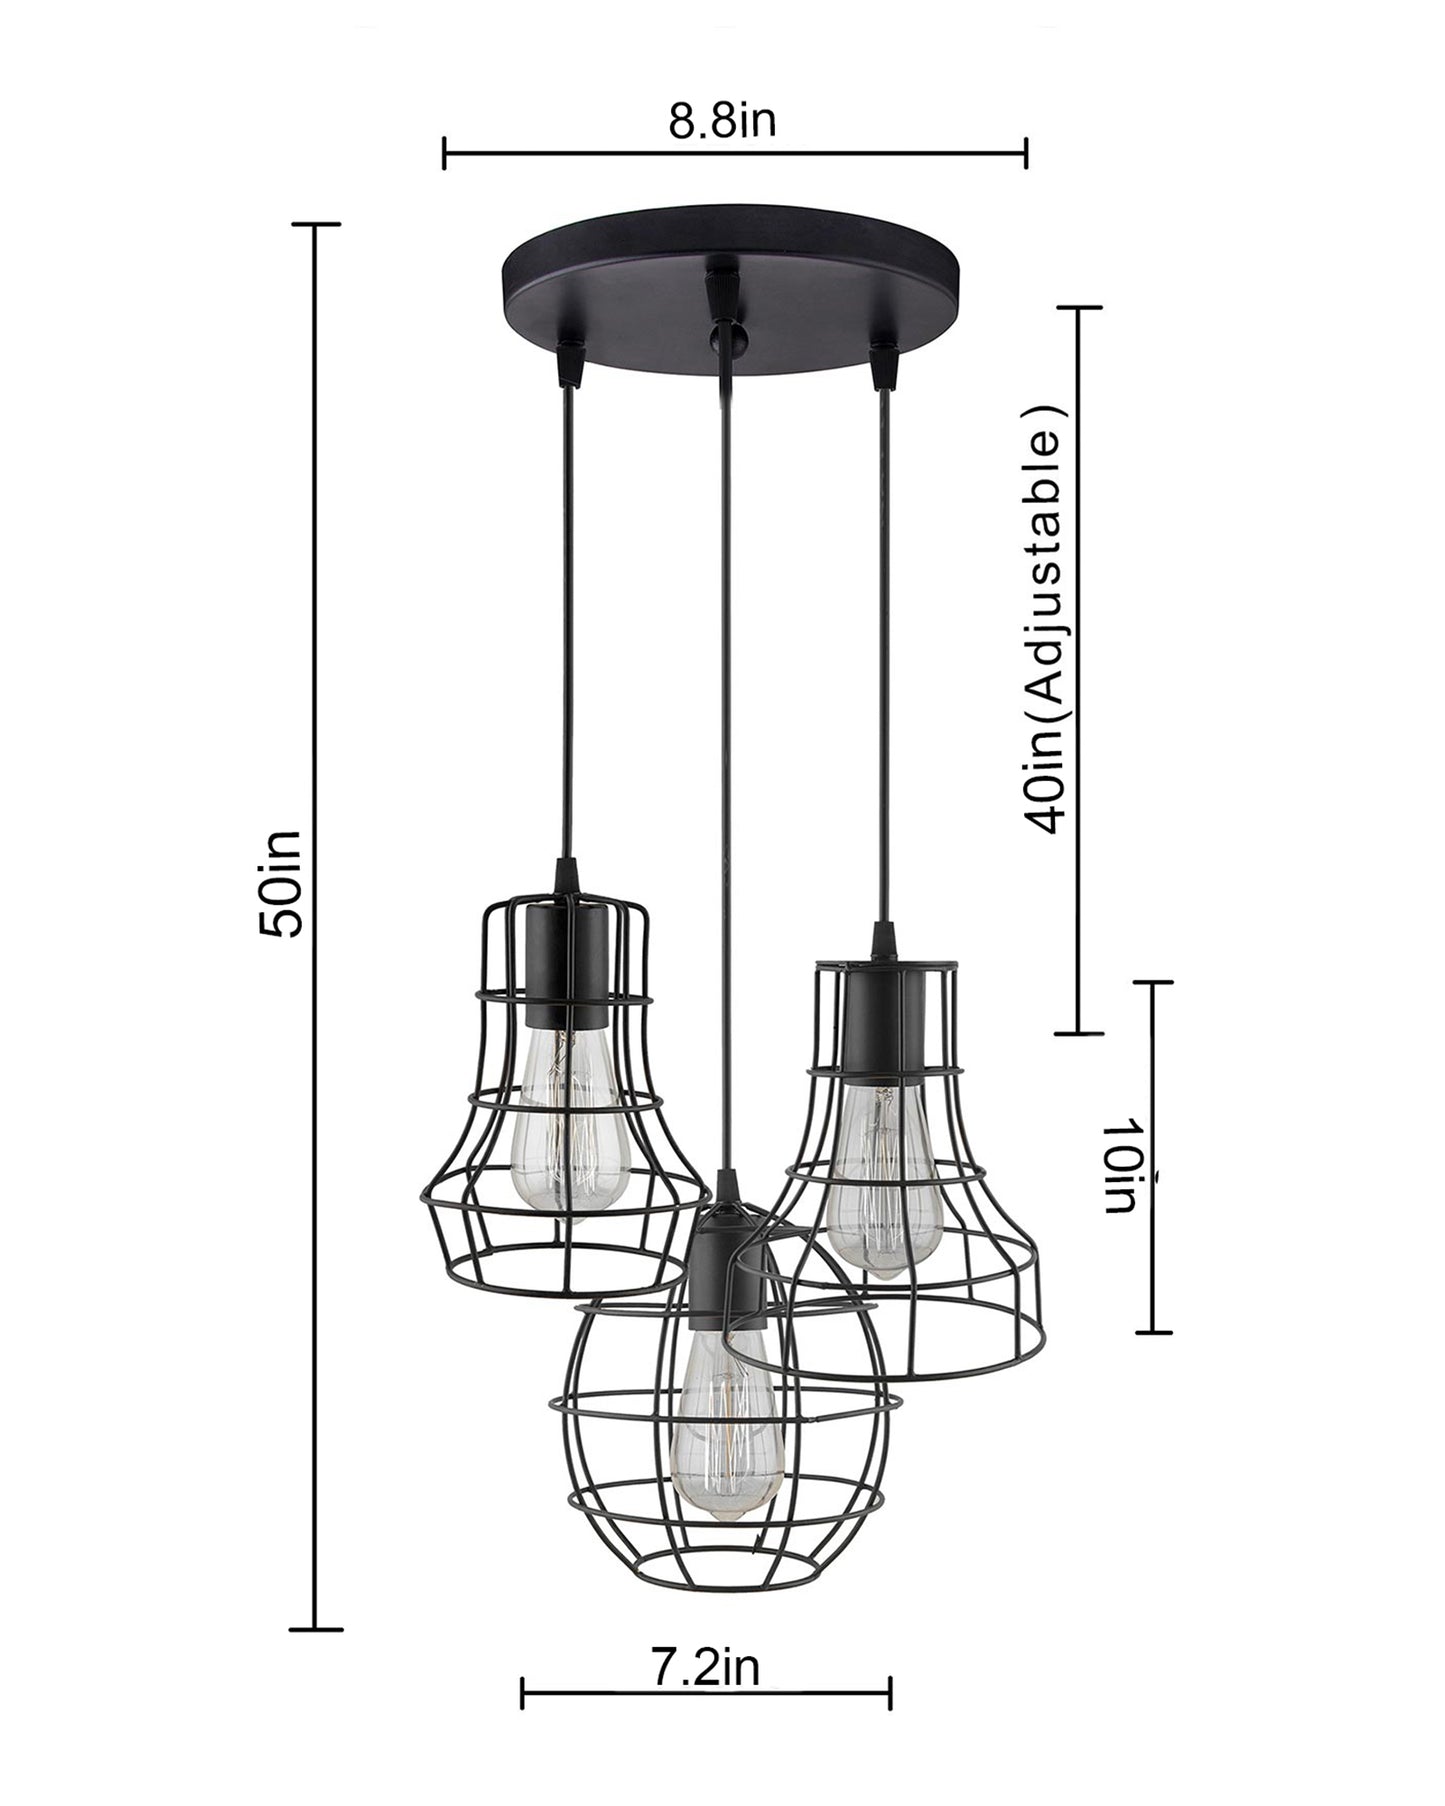 3-lights Round Cluster Chandelier Metal Hanging Pendant Light with Braided Cord, Industrial Retro modern light (Bulb not included)